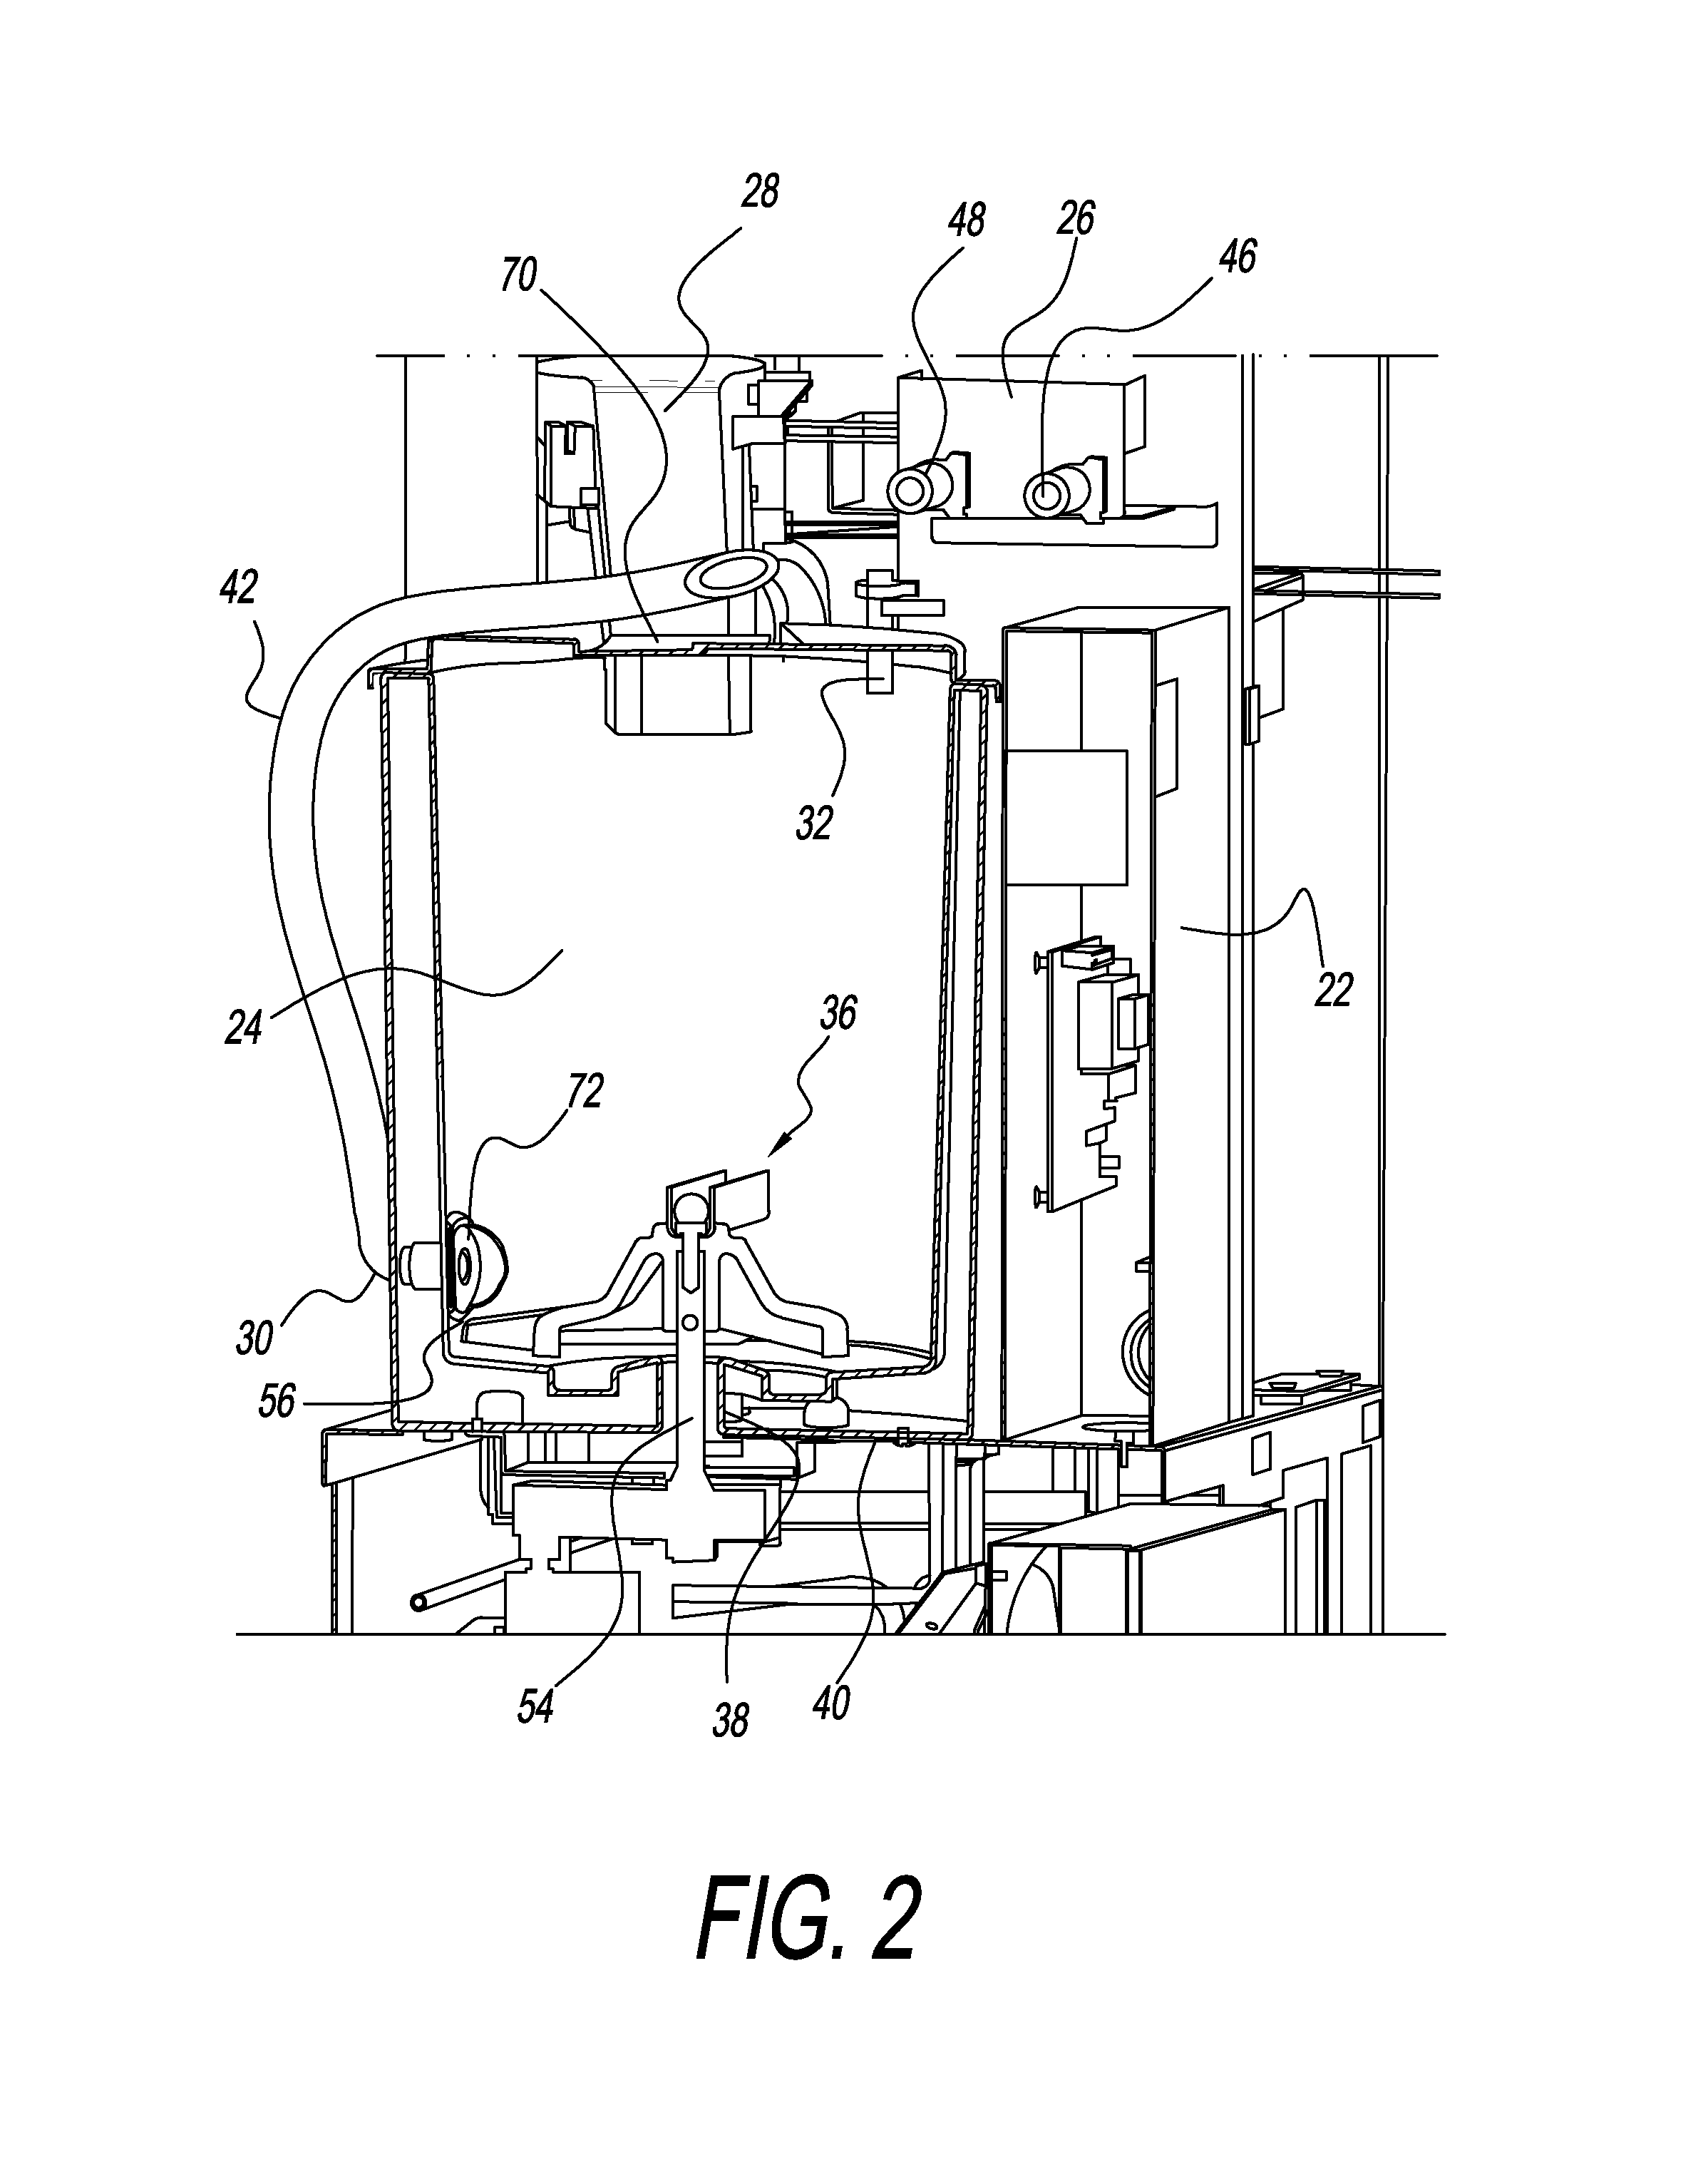 Sanitation system and method for ice storage and dispensing equipment